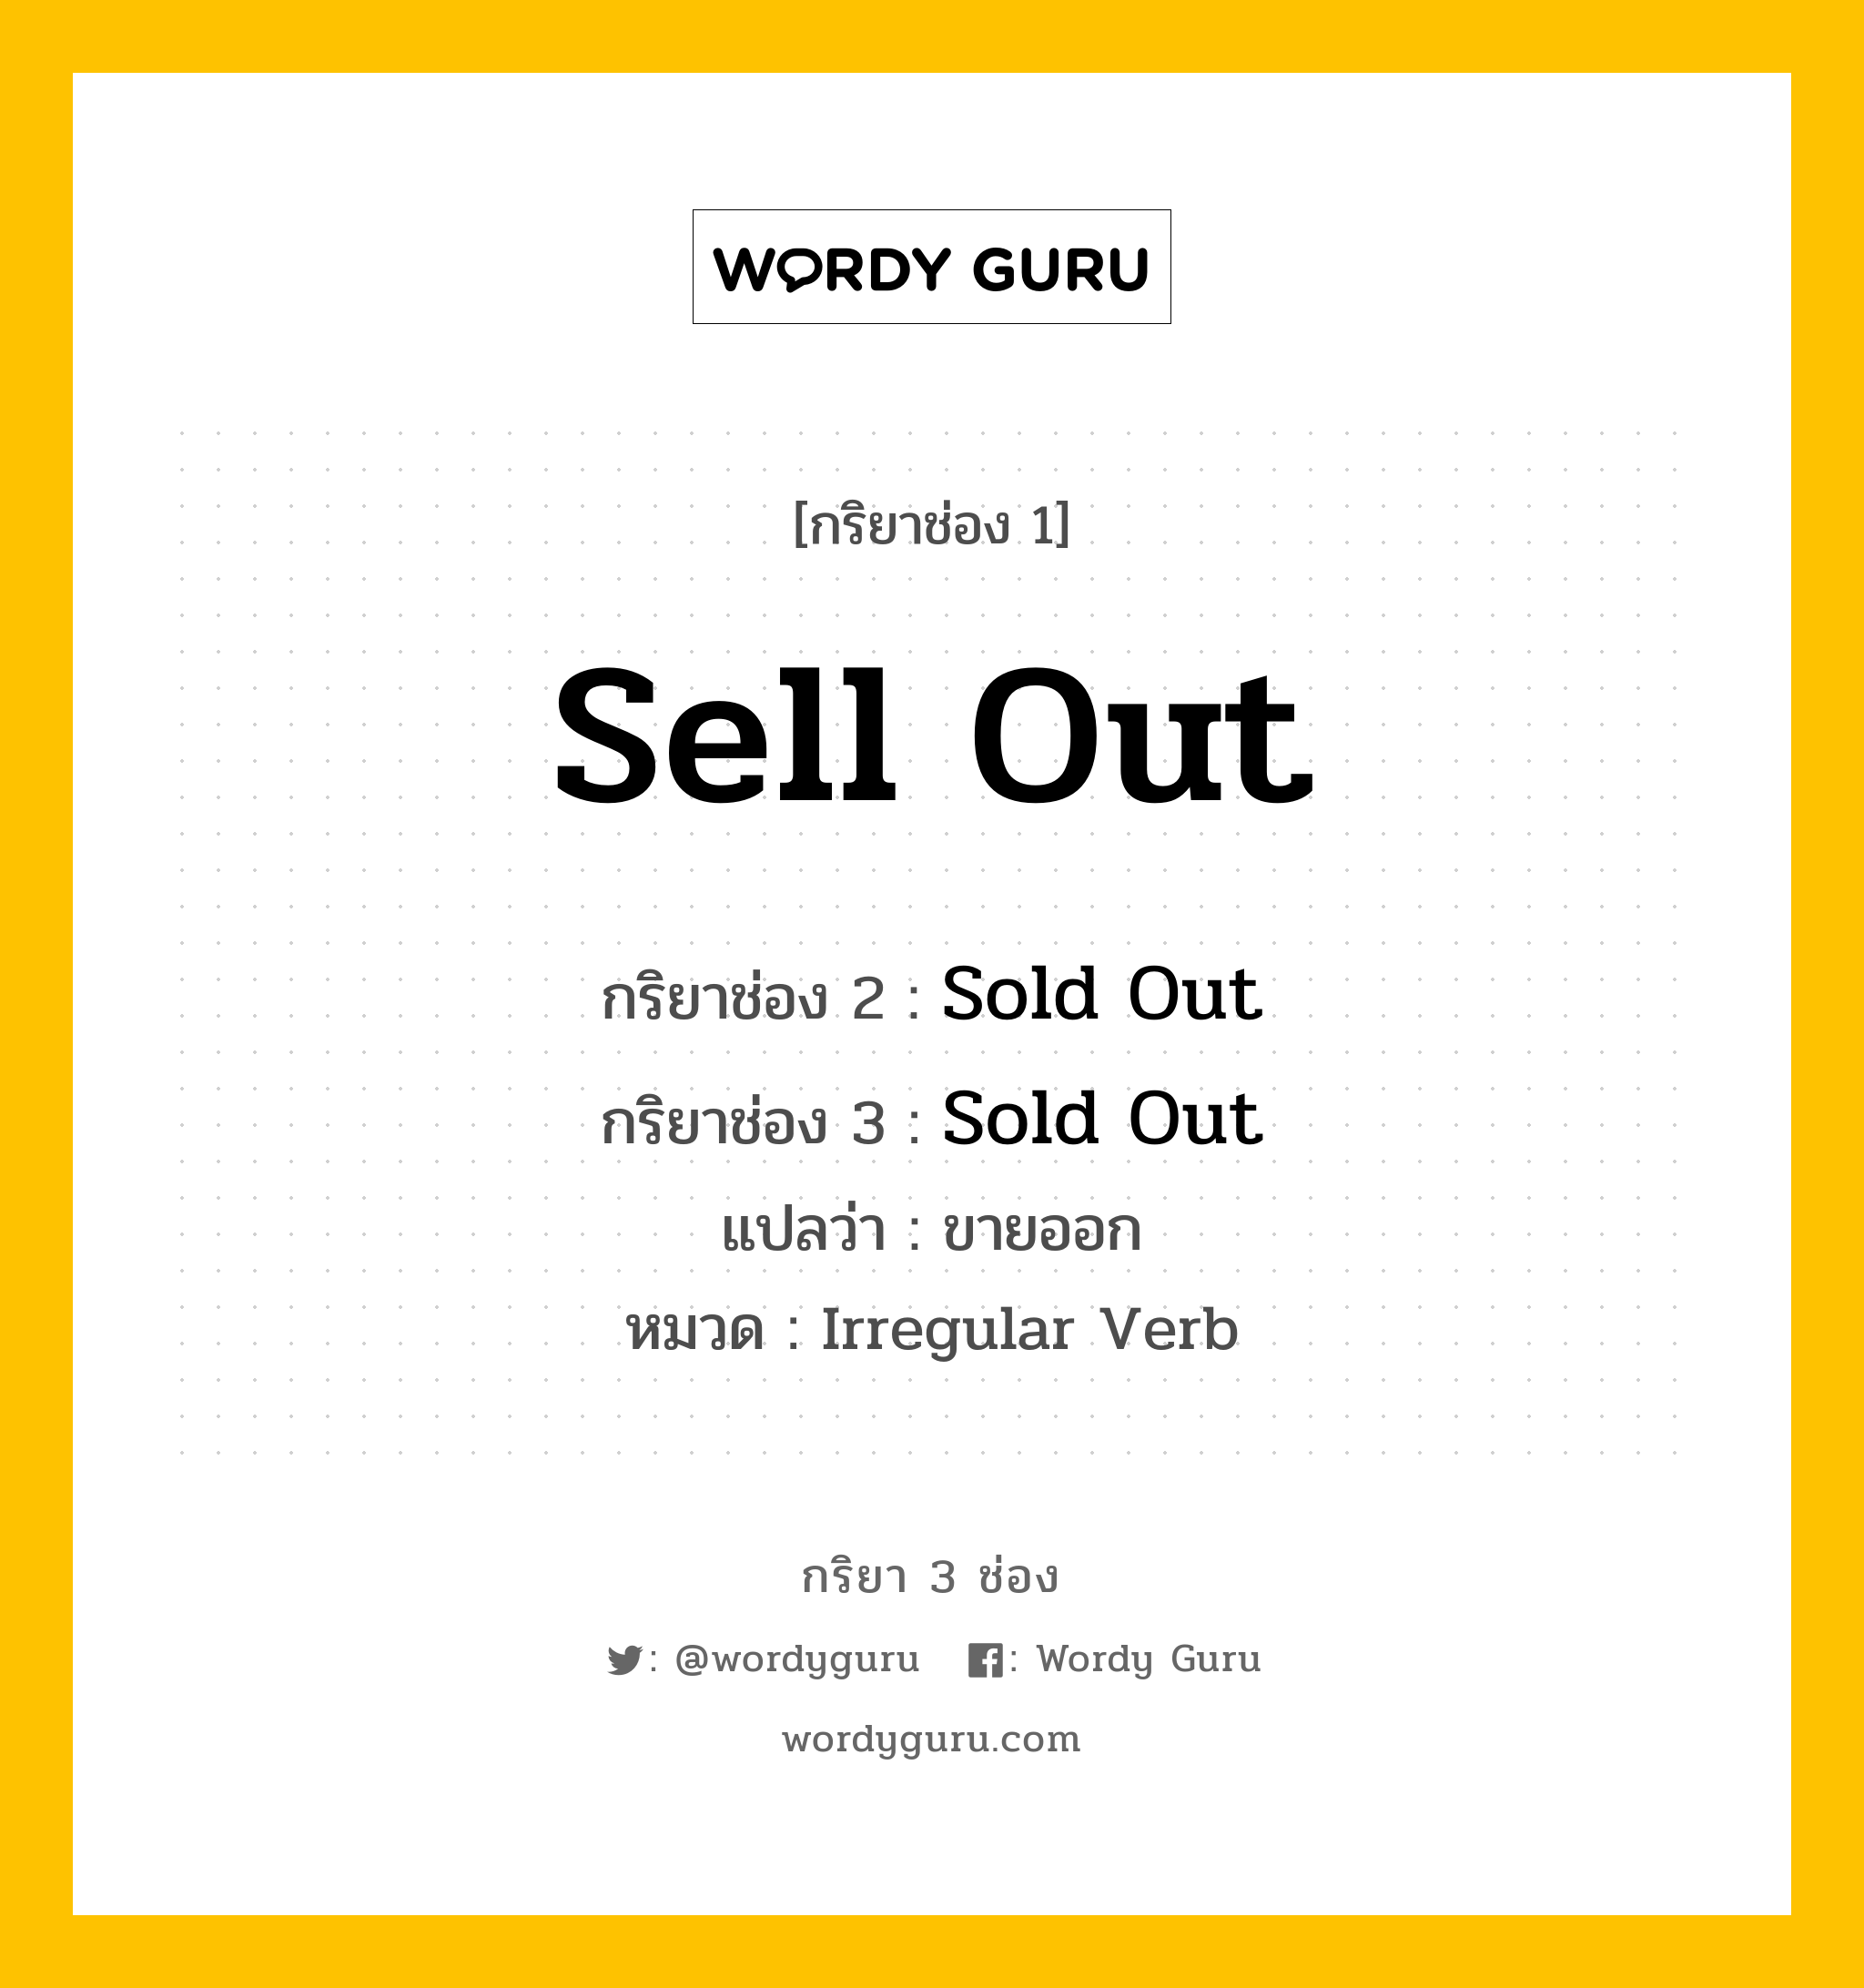 Sell Out